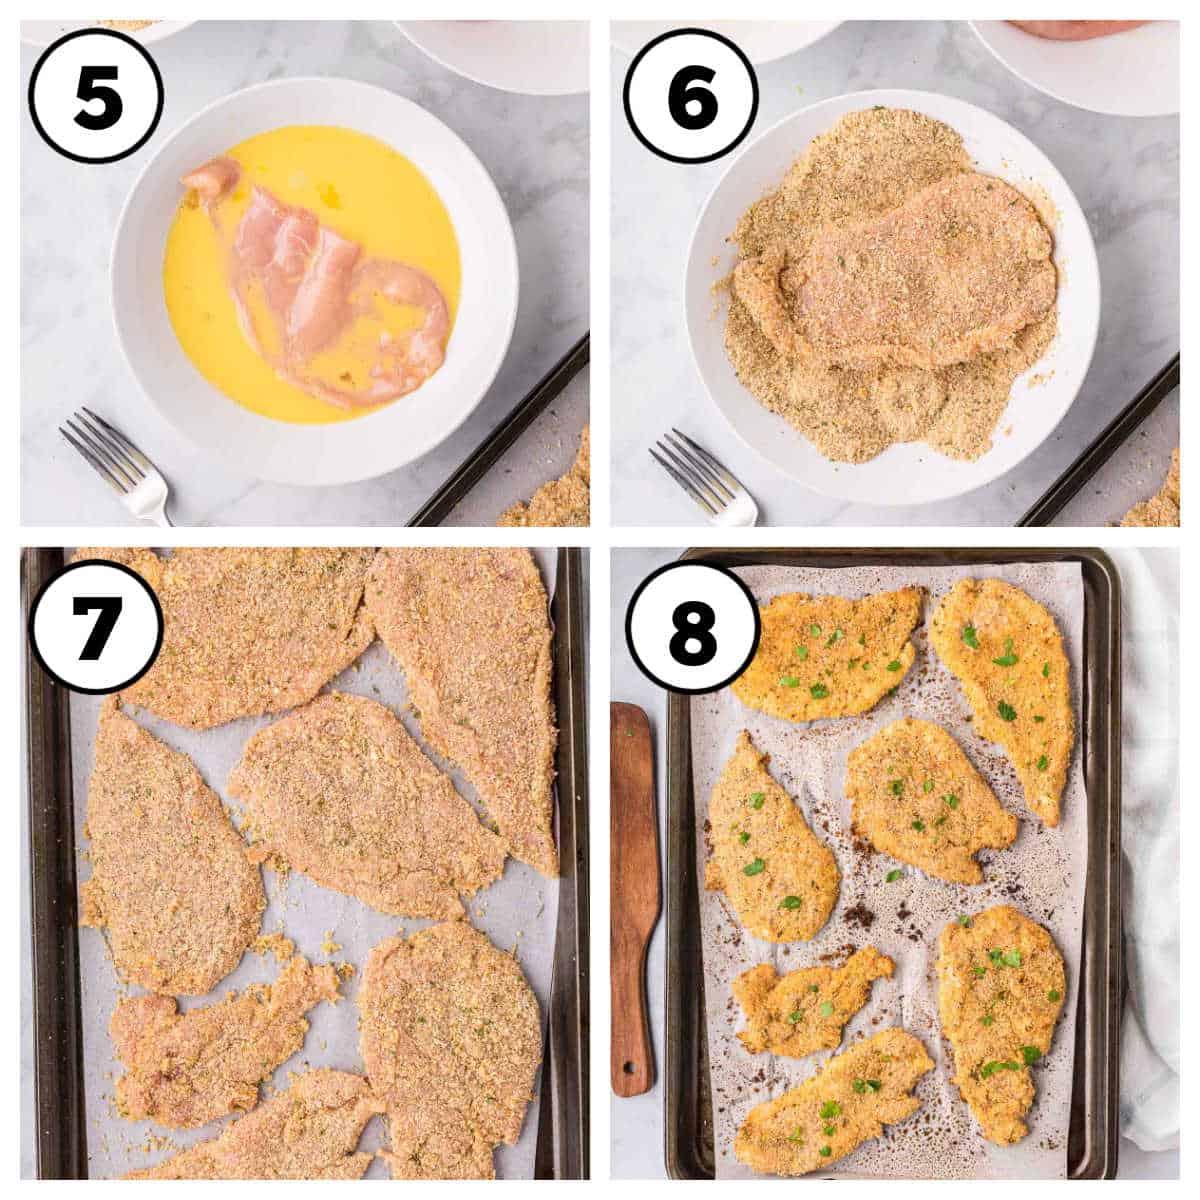 Steps 5-8 of how to bake chicken cutlets.